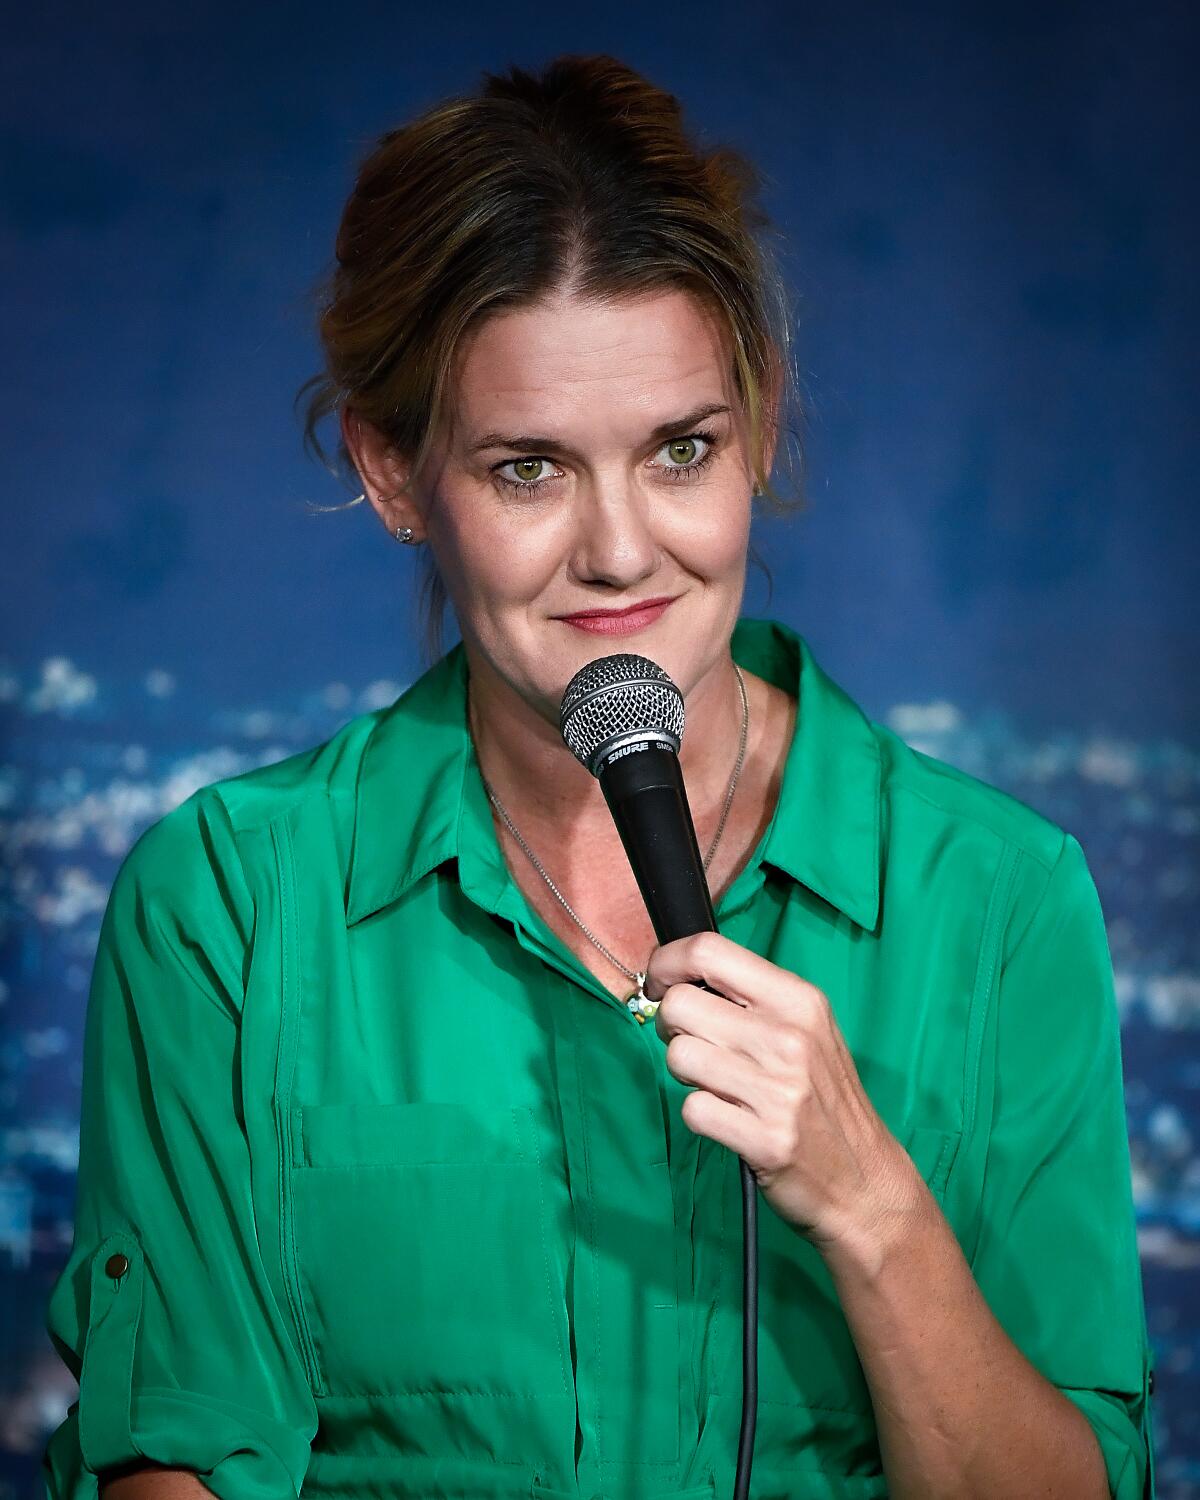 Jen Murphy performing comedy onstage.